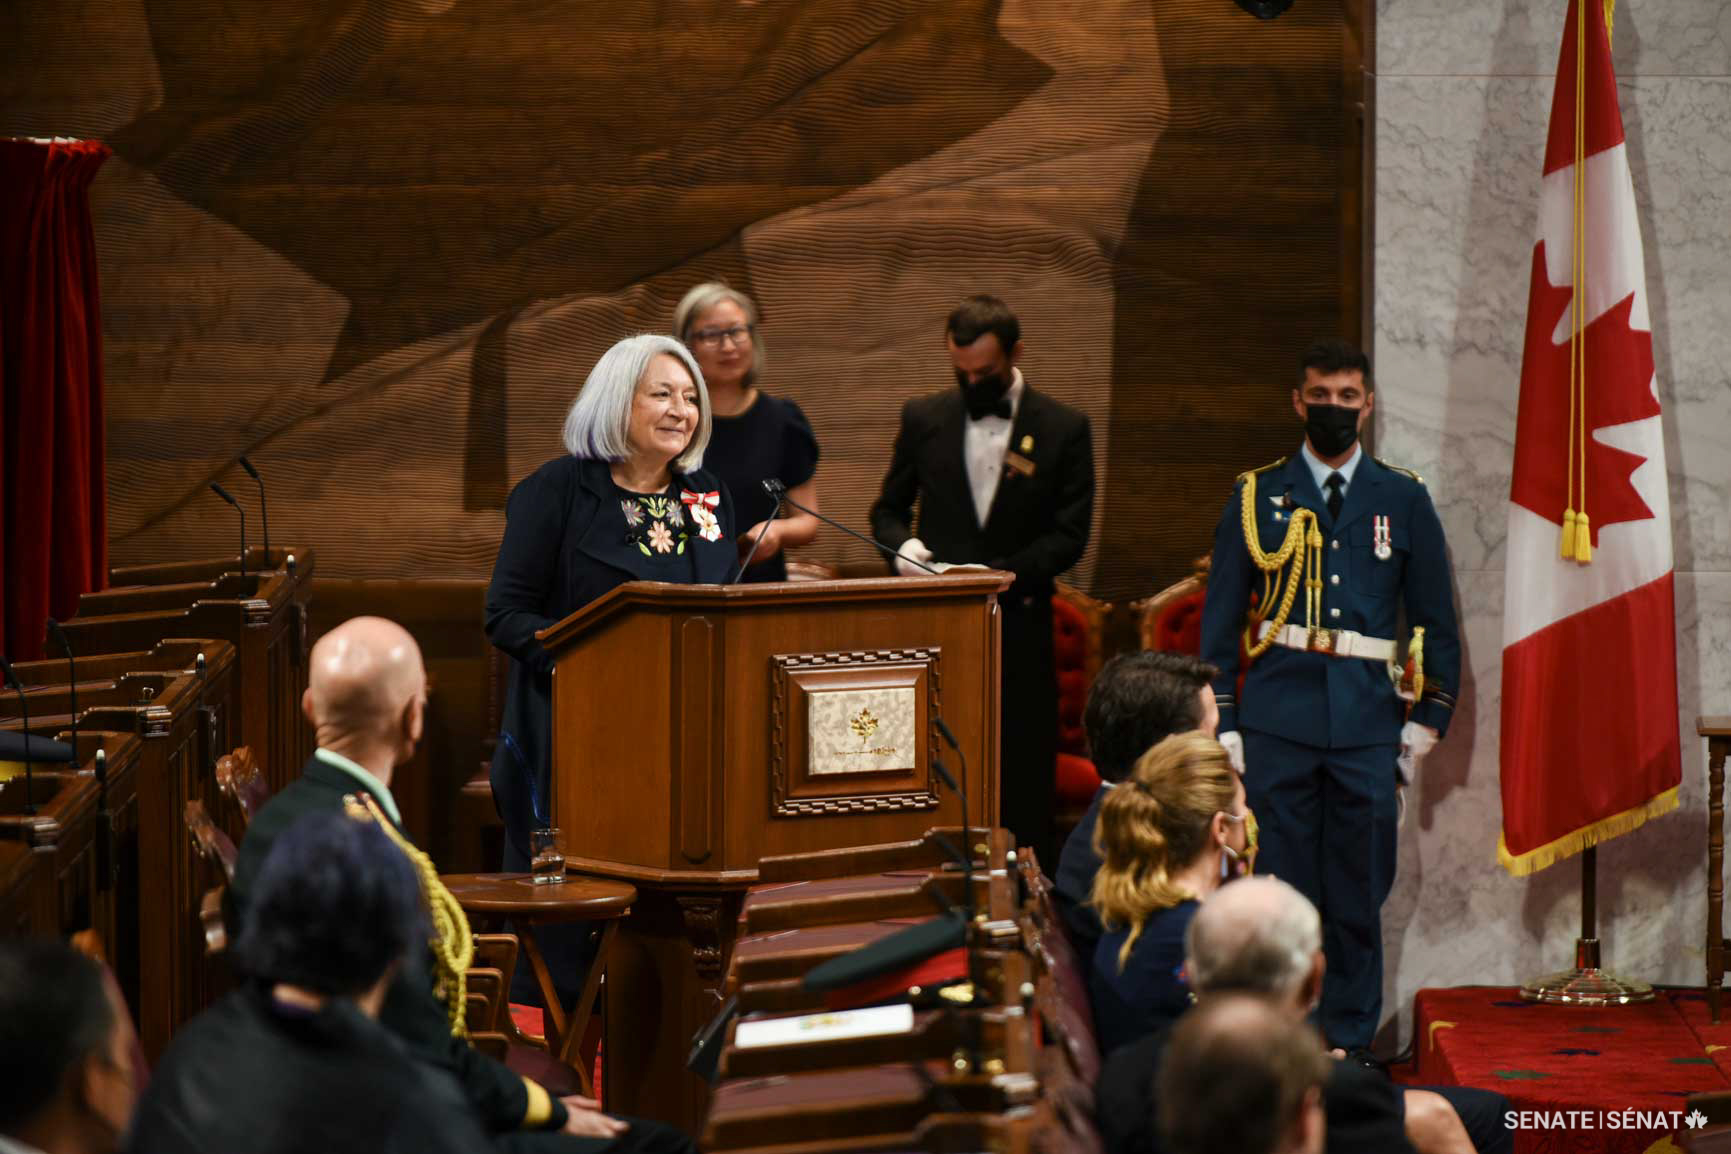 The new governor general delivers her inaugural speech in the Senate Chamber.